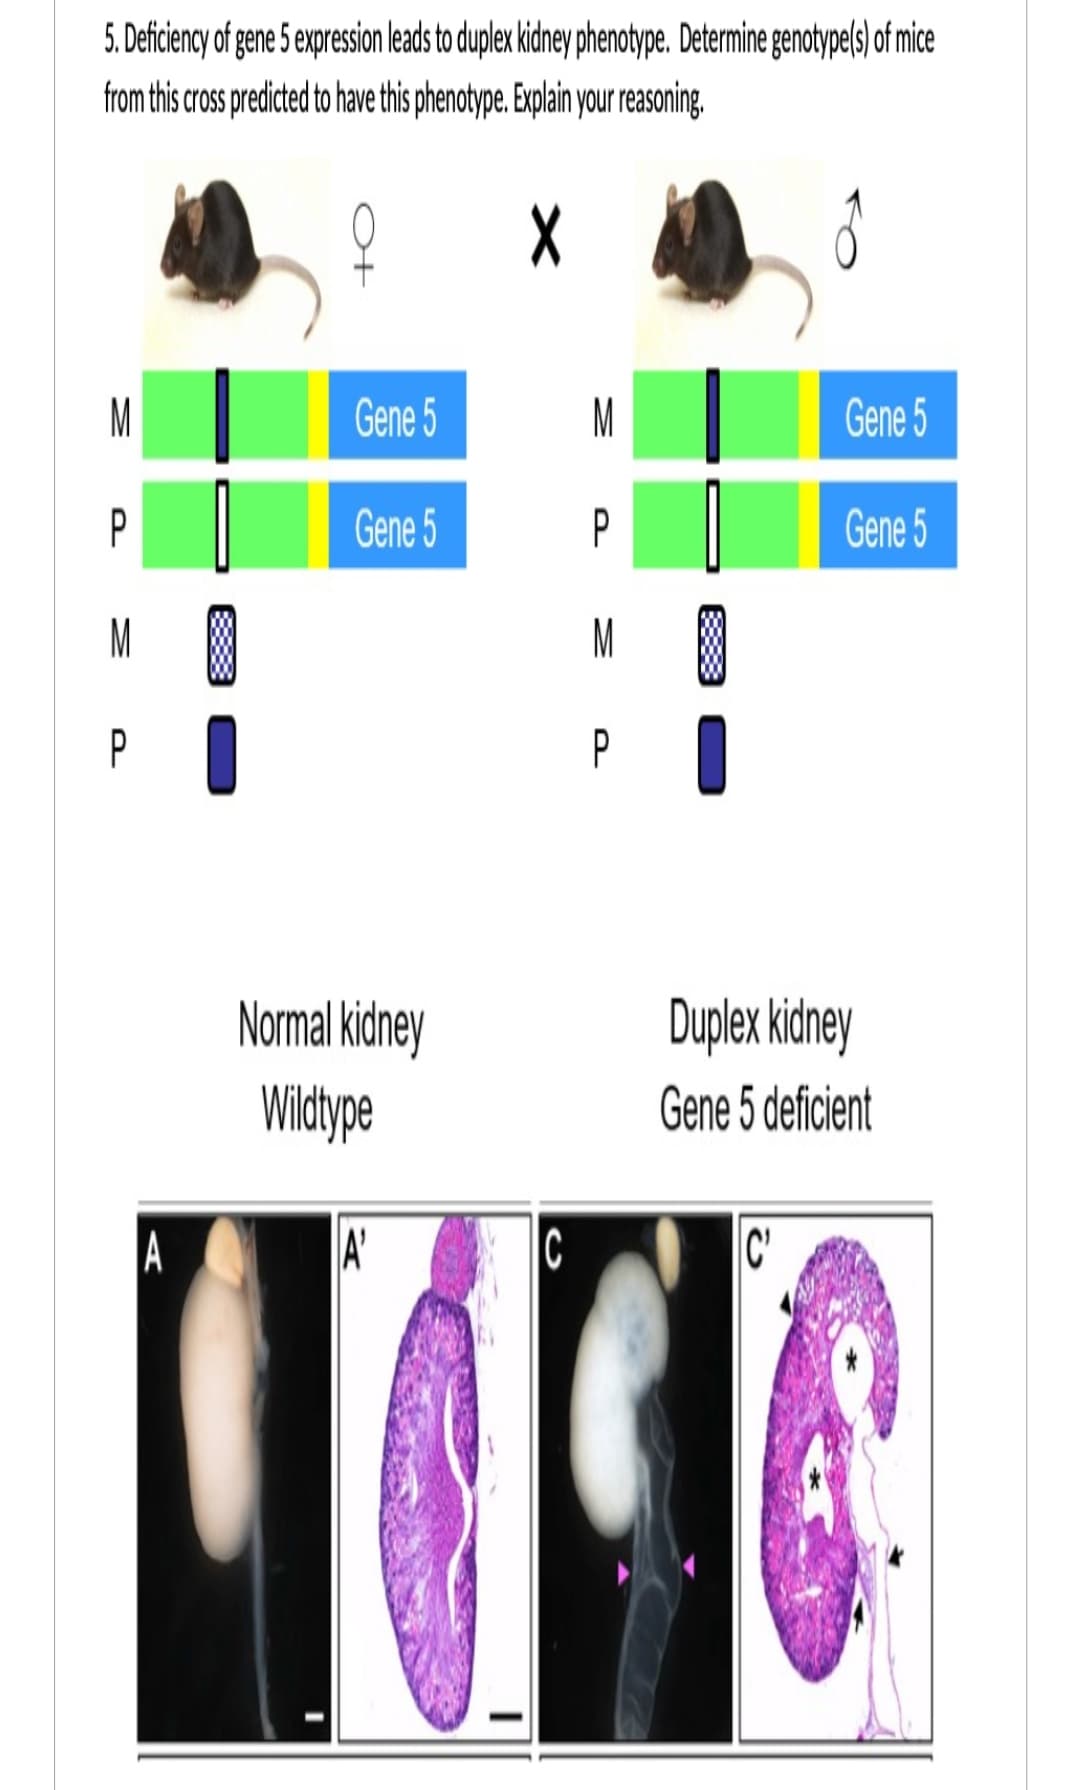 5. Deficiency of gene 5 expression leads to duplex kidney phenotype. Determine genotype(s) of mice
from this cross predicted to have this phenotype. Explain your reasoning.
Q
X
P
P
A
Gene 5
Gene 5
Normal kidney
Wildtype
A'
C
>
P
M
P
Gene 5
C'
Gene 5
Duplex kidney
Gene 5 deficient